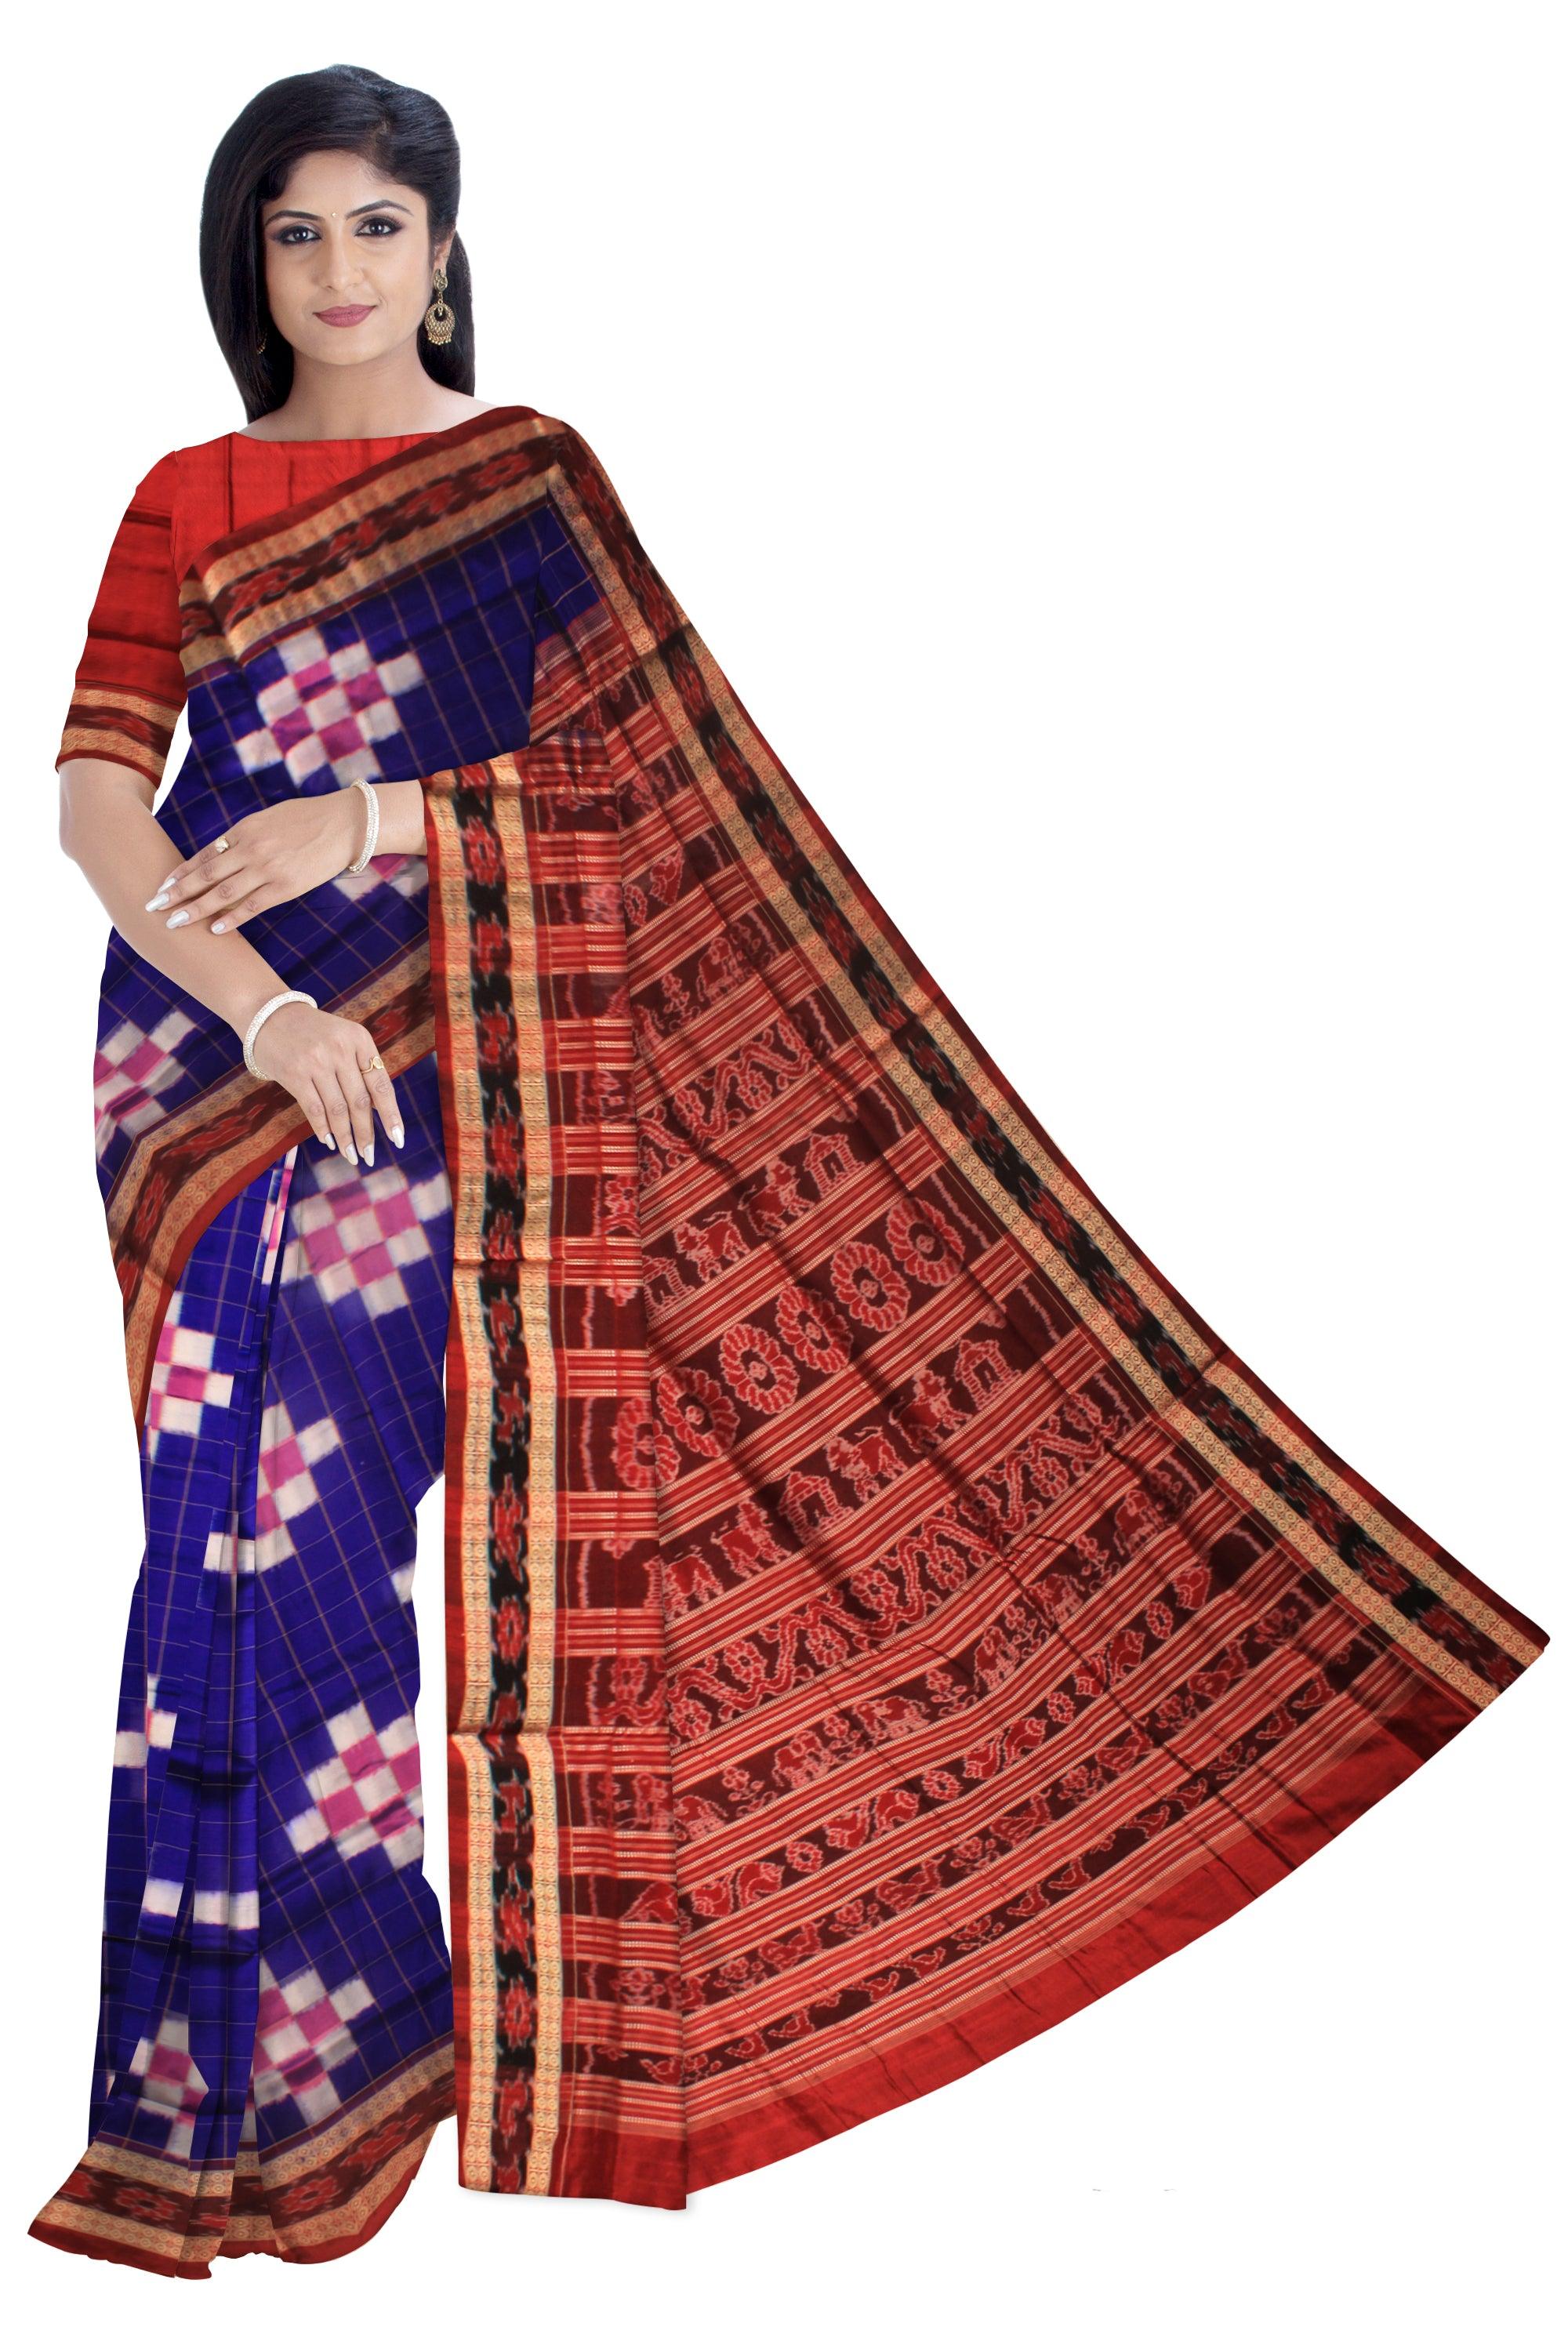 BLUE, RED AND WHITE COLOR BIG PASAPALI DESIGN PATA SAREE, ATTACHED WITH BLOUSE PIECE. - Koshali Arts & Crafts Enterprise